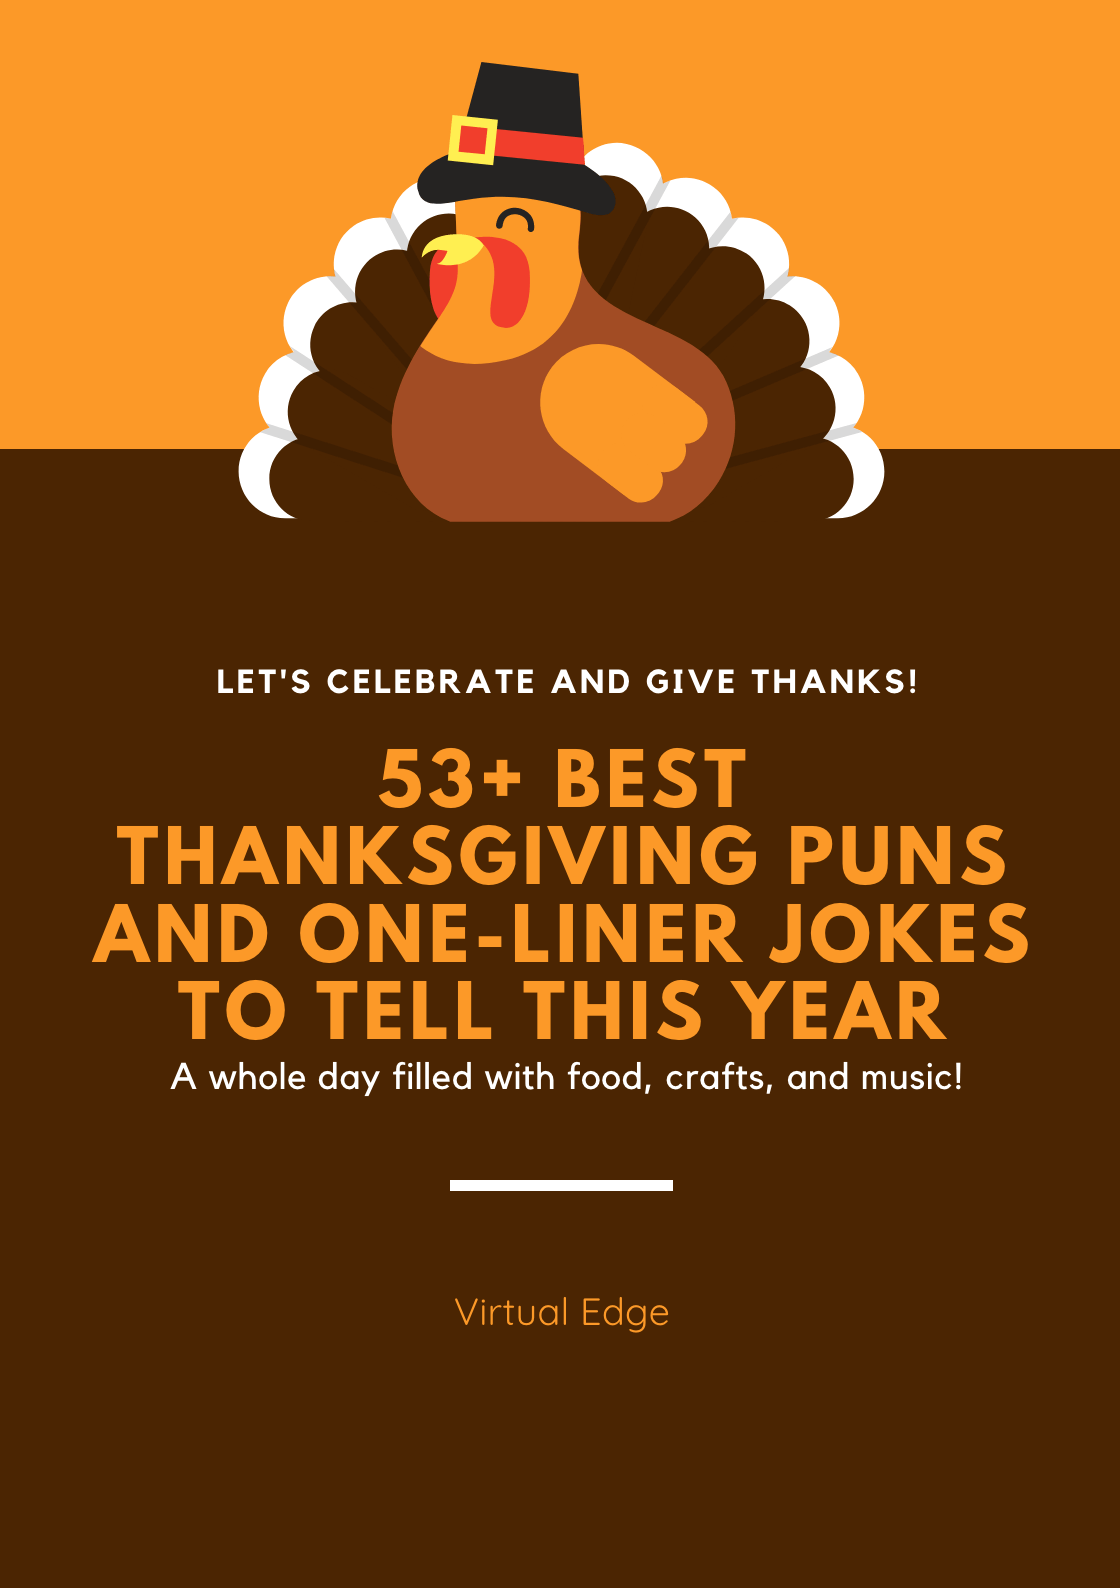 53+ Best Thanksgiving Puns and One-Liner Jokes to Tell This Year